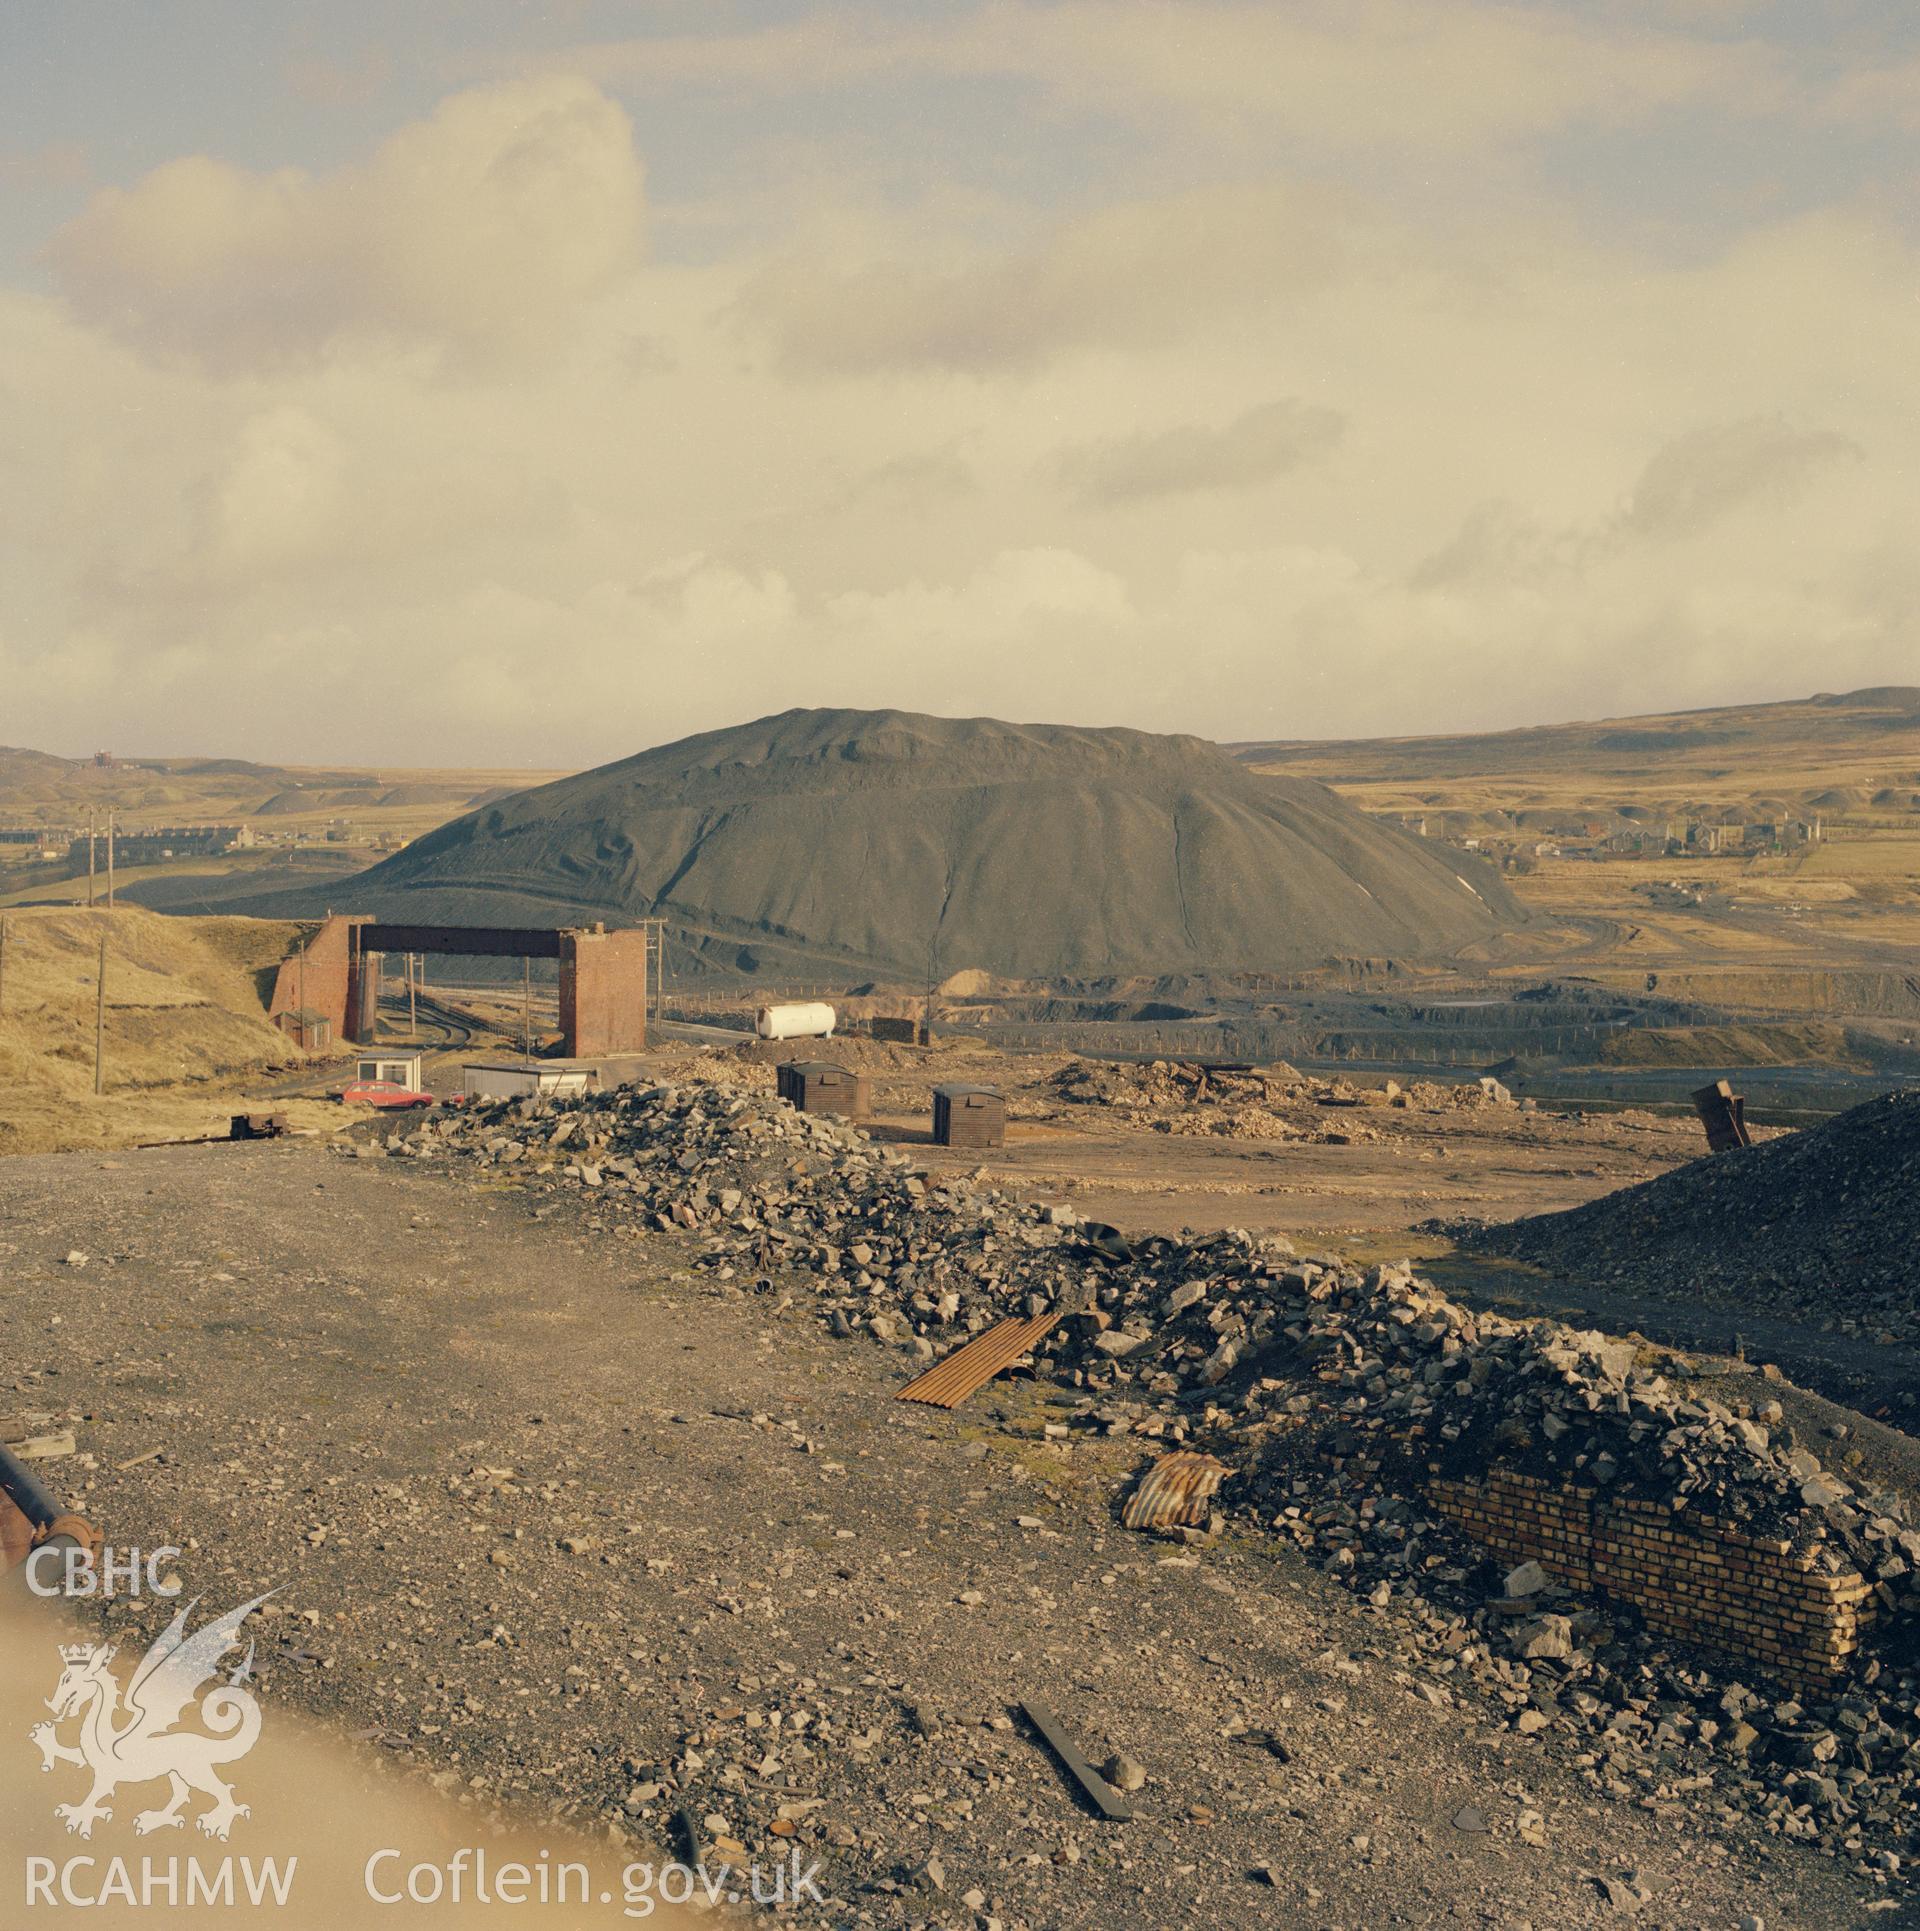 Digital copy of an acetate negative showing the washery tip at Big Pit, Blaenavon from the John Cornwell Collection.